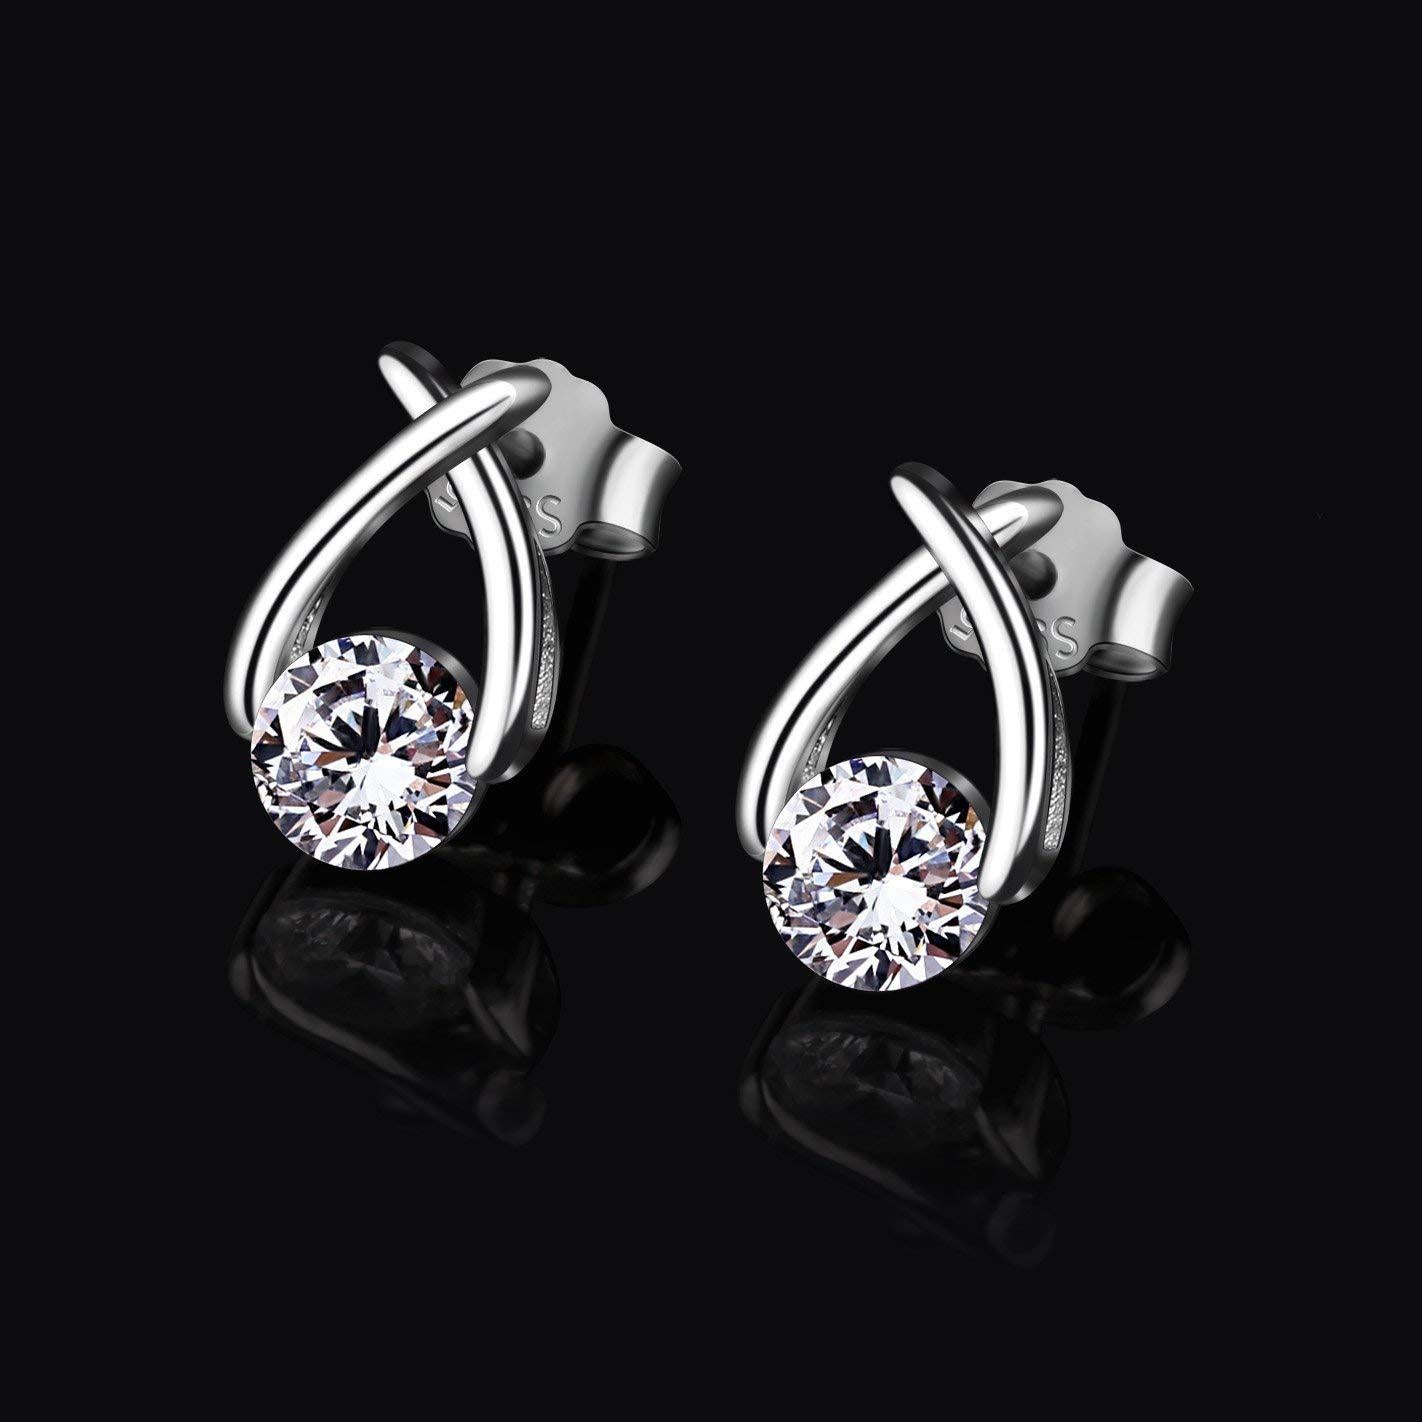 S925 Sterling Silver Creative Cross Budding Personality Wild Earrings Jewelry Cross-Border Exclusive